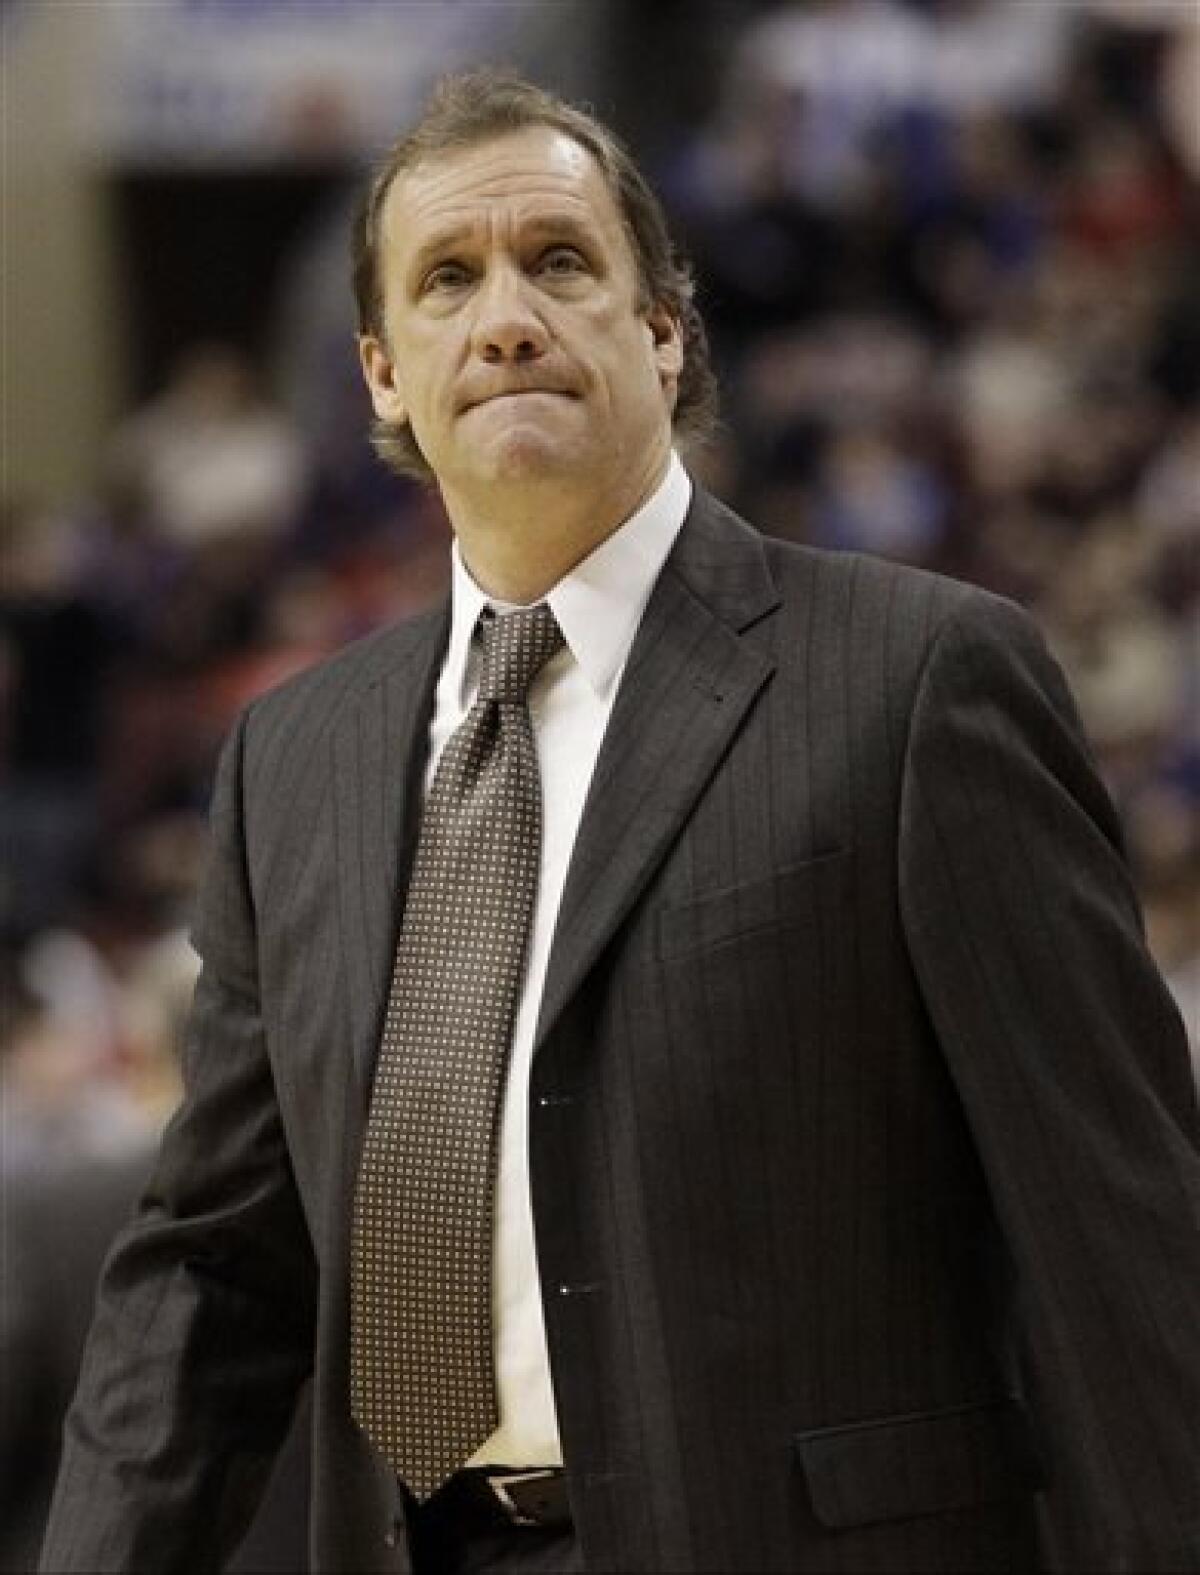 FILE - In this Jan. 13, 2012, file photo, then-Washington Wizards head coach Flip Saunders looks on during a break in an NBA basketball game against the Philadelphia 76ers in Philadelphia. David Kahn is out as president of basketball operations for the Minnesota Timberwolves and Flip Saunders is coming in. Three people with knowledge of the situation tell The Associated Press that team owner Glen Taylor has decided not to pick up the option for next season on Kahn's contract. He is also putting